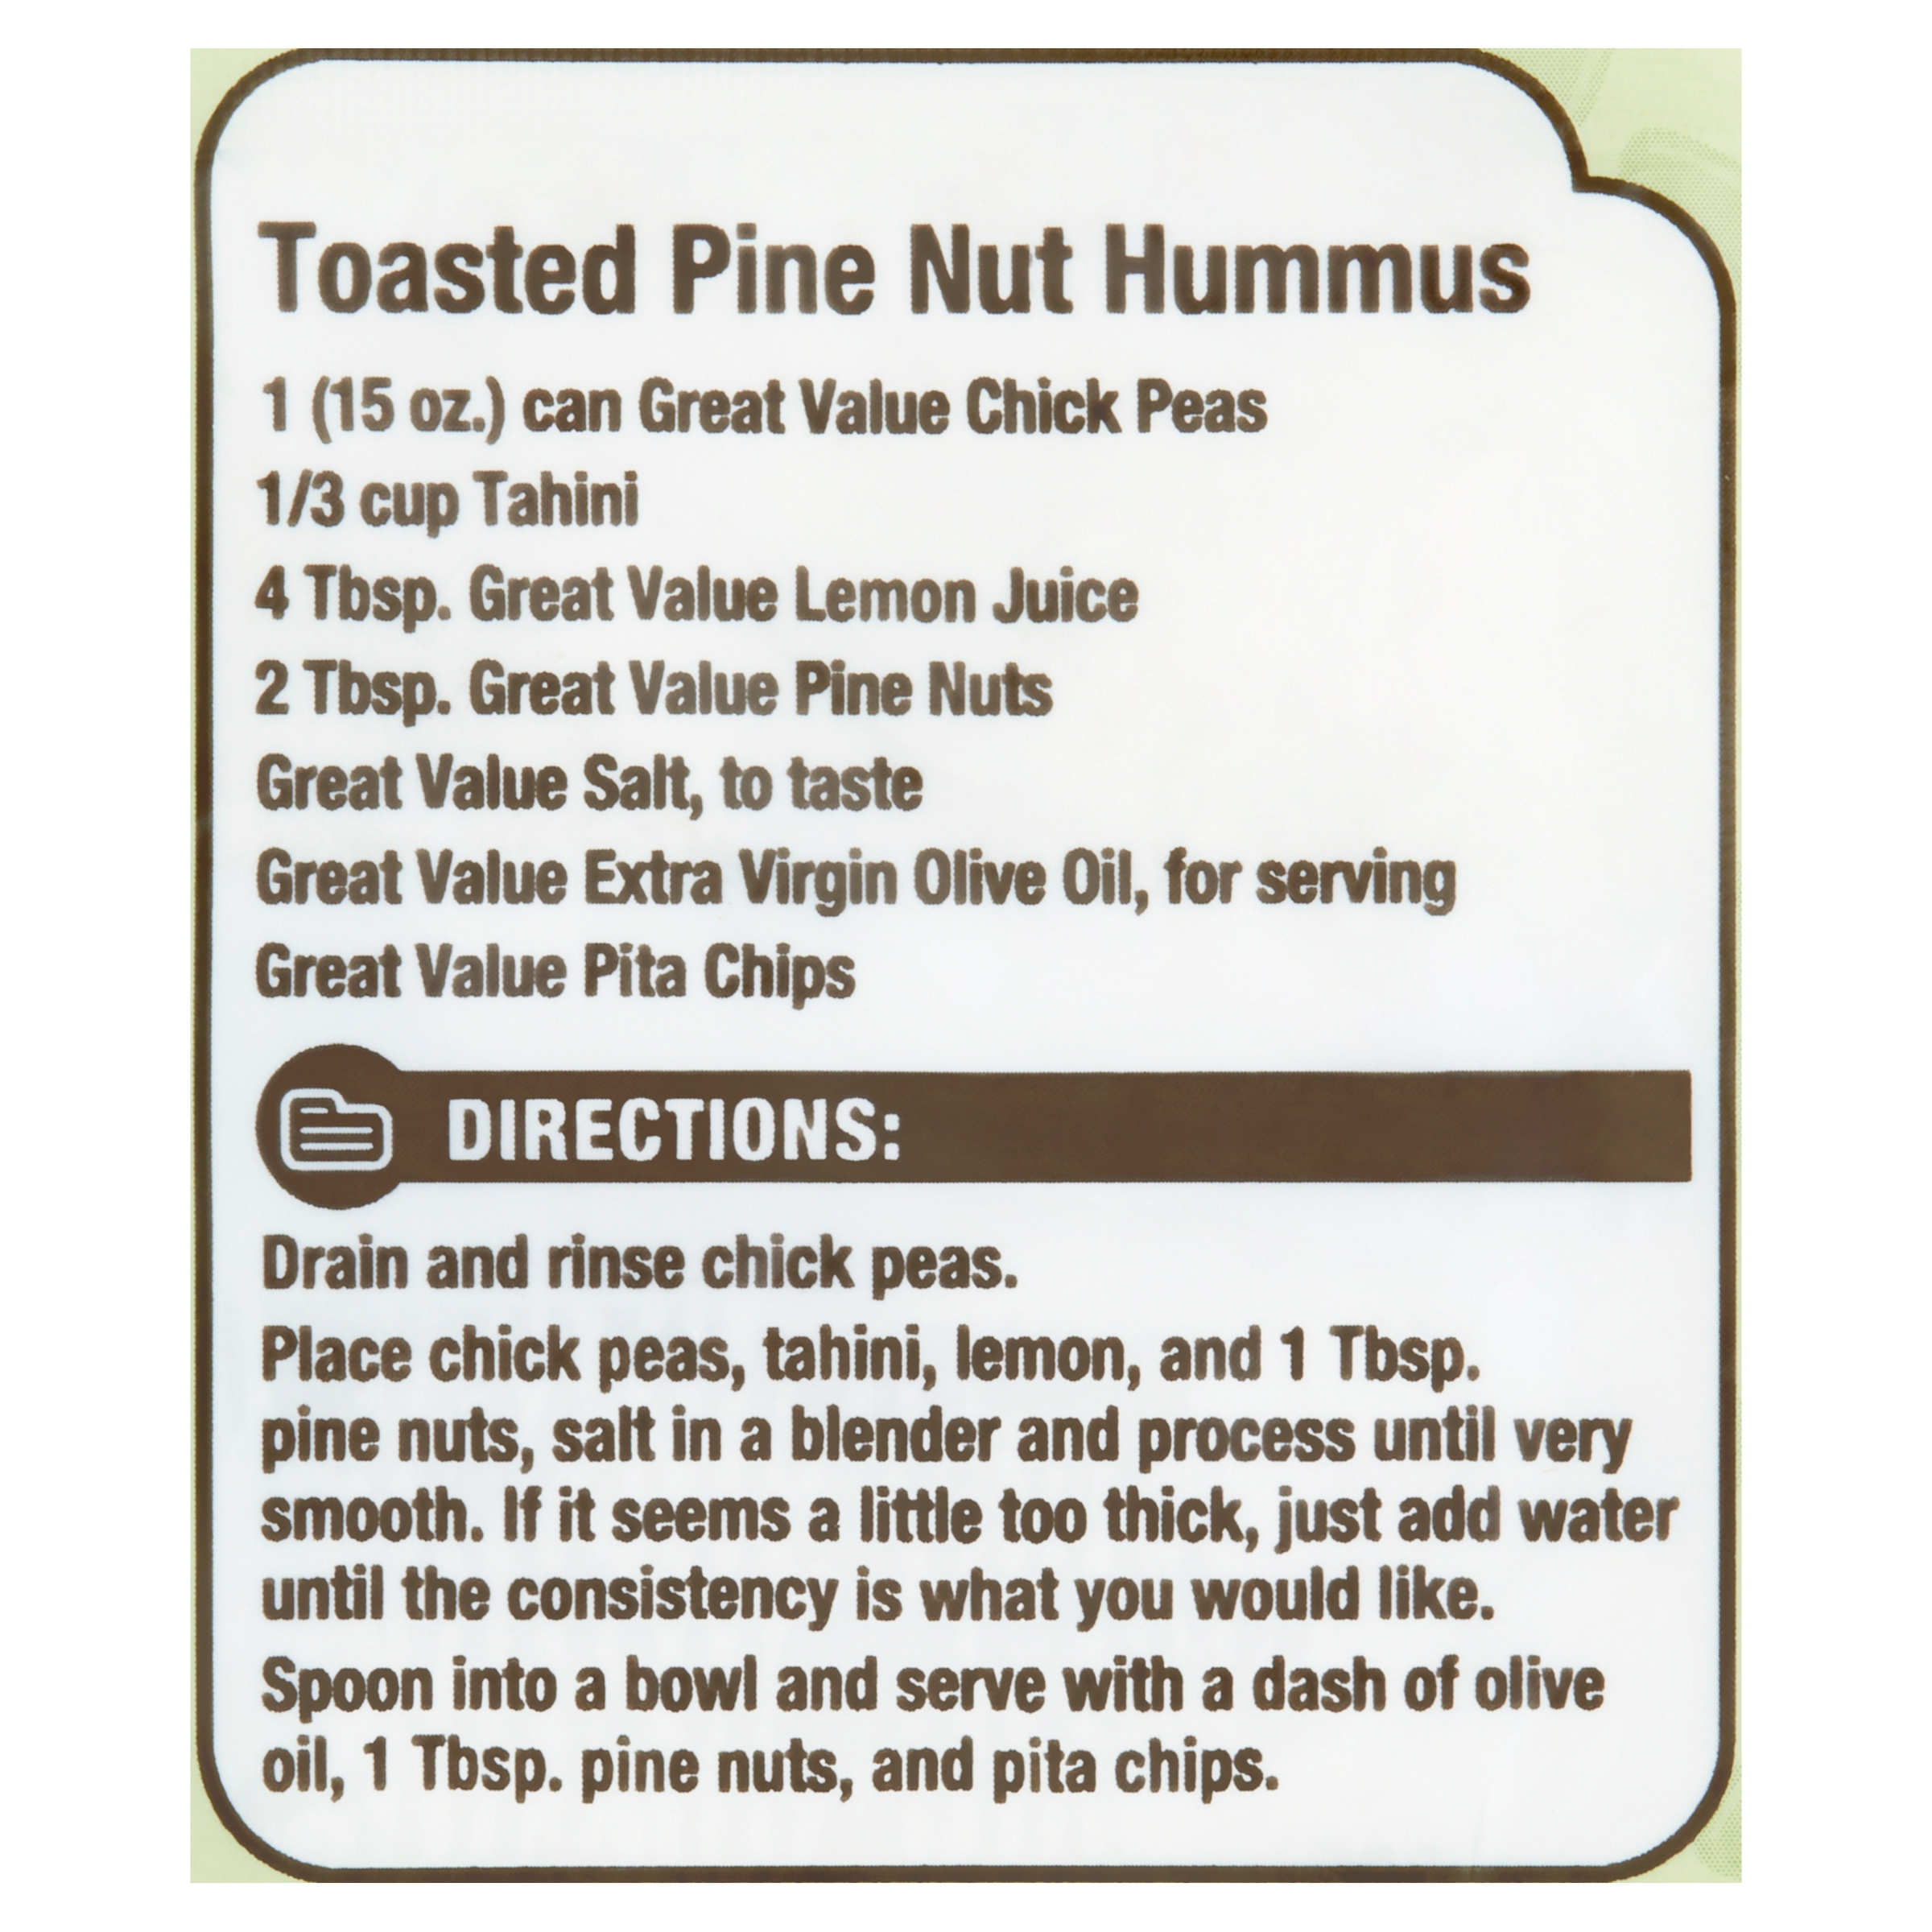 Great Value Pine Nuts, 4 oz - image 5 of 8